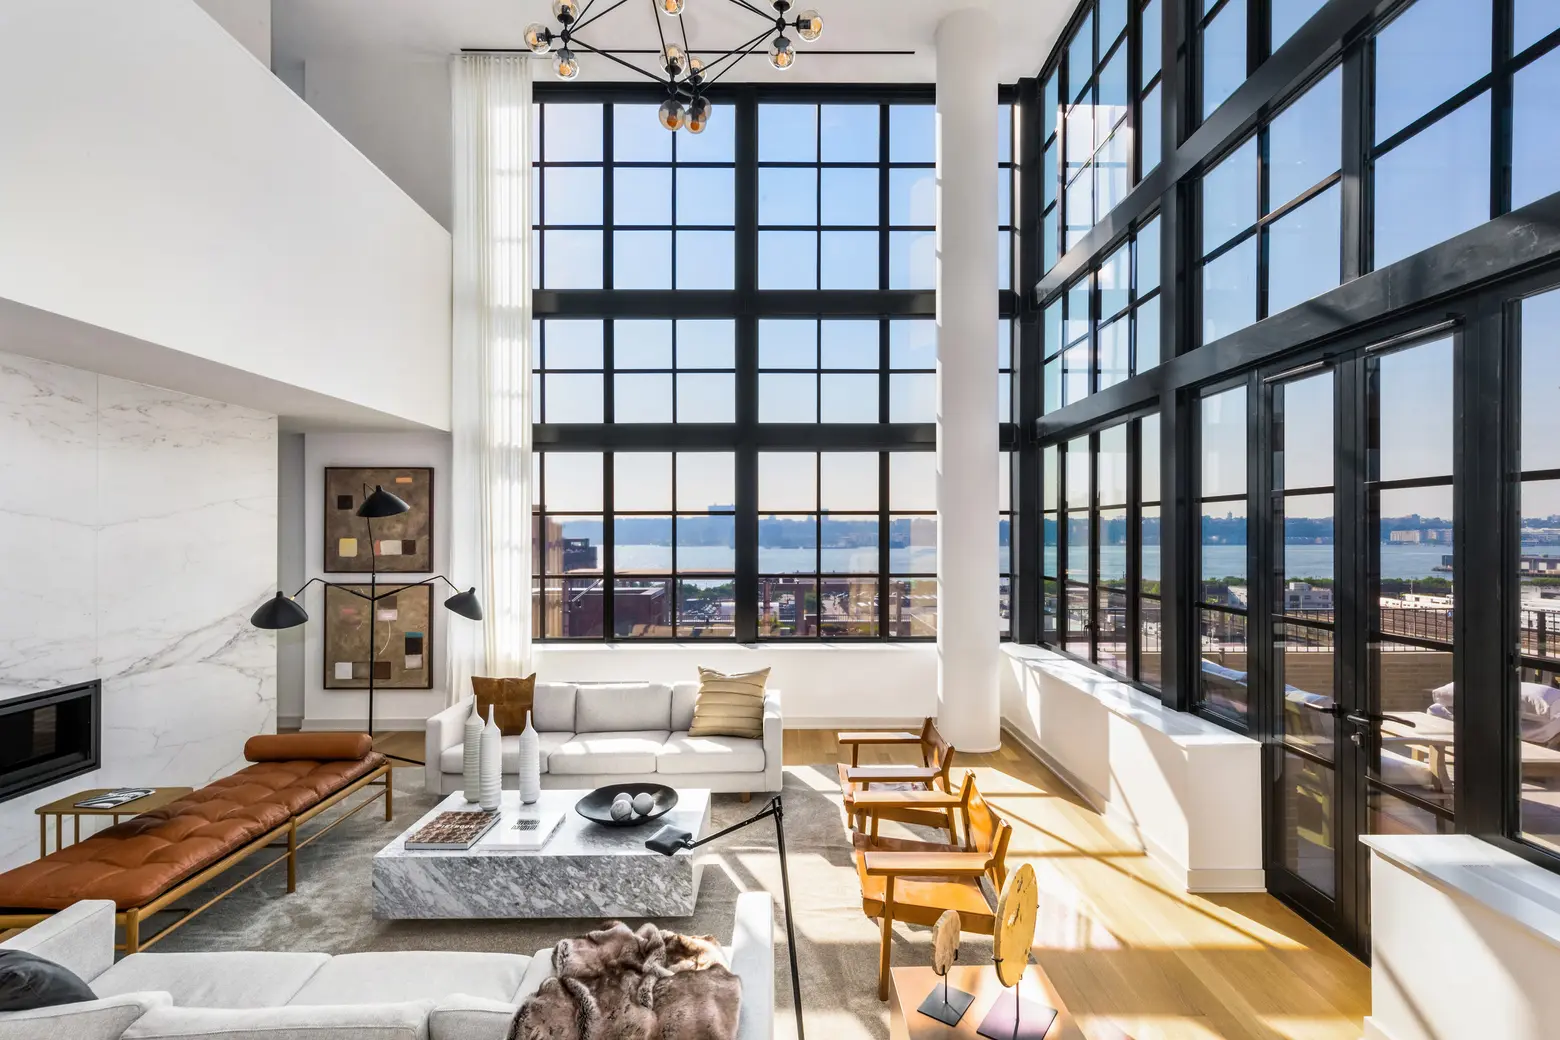 Is SoHY the next hot neighborhood? New ‘South of Hudson Yards’ condo thinks so